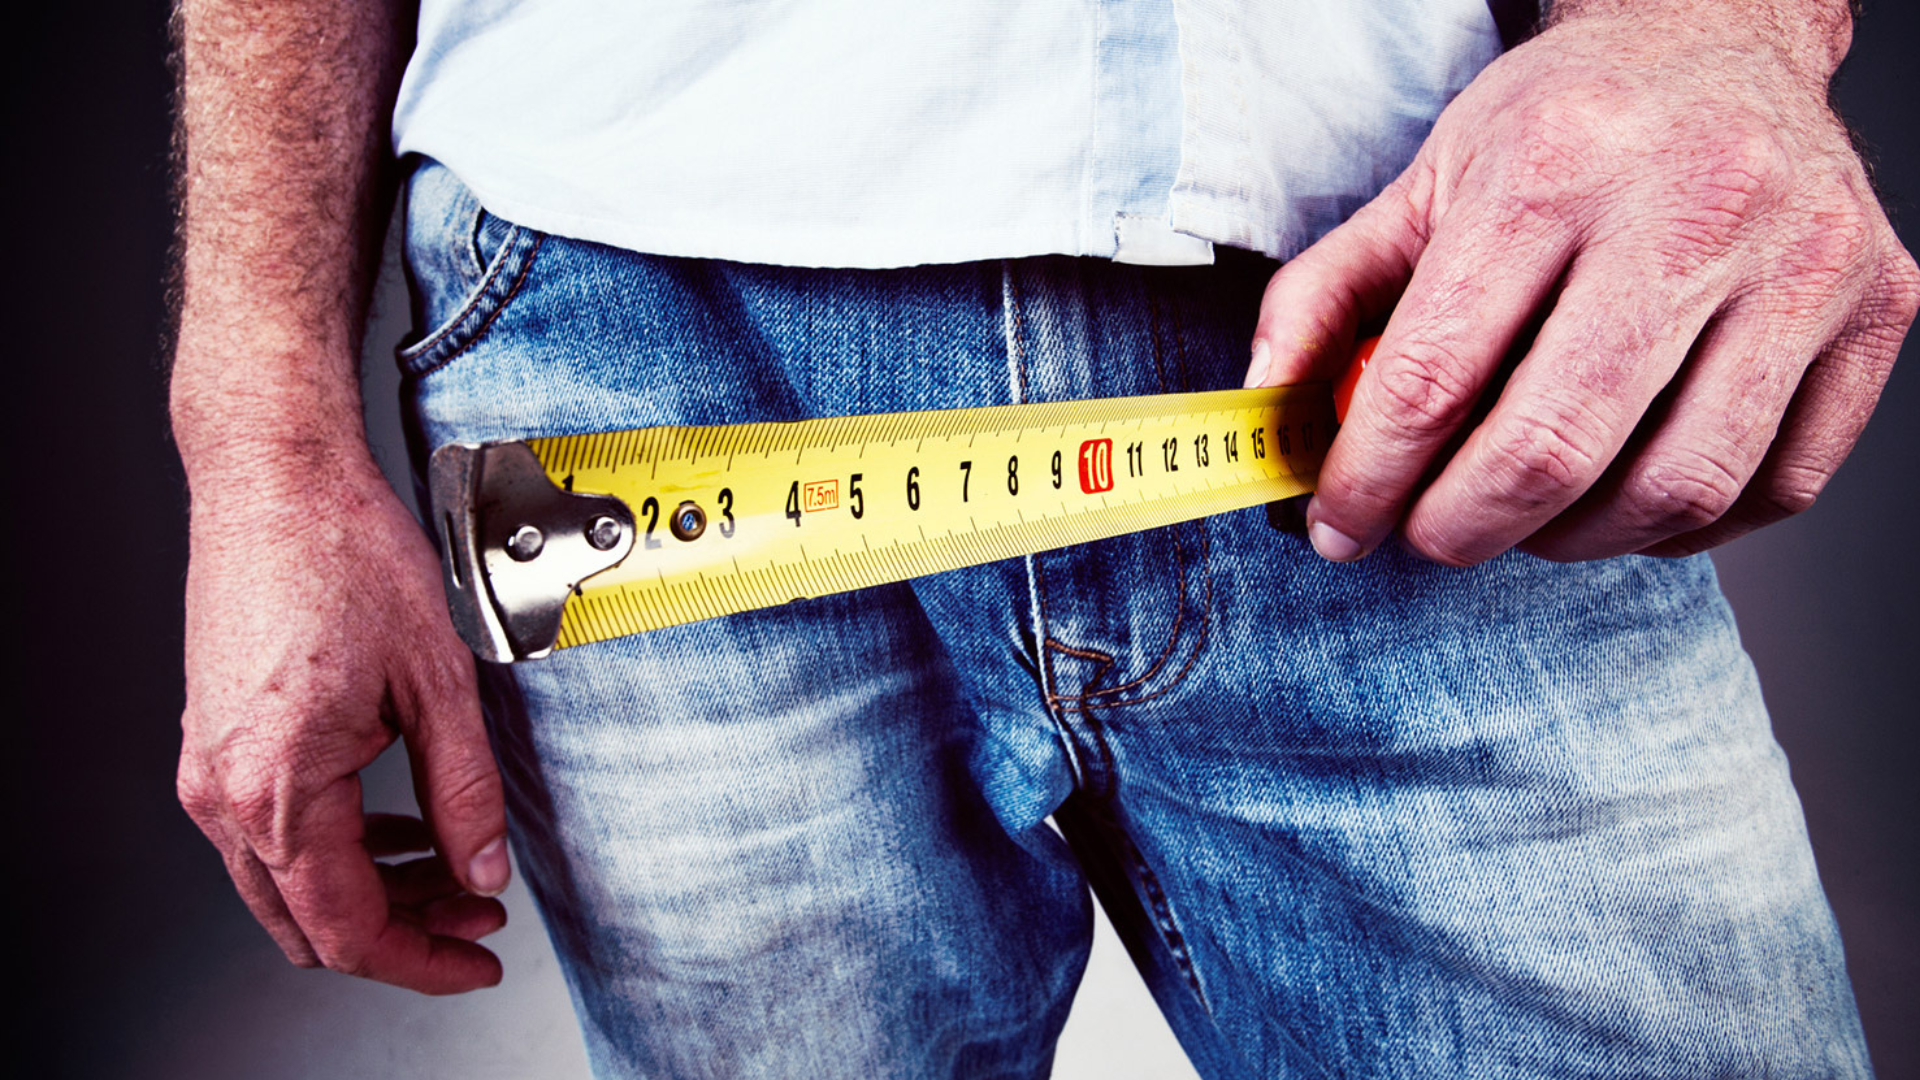 A man wearing denim pants while holding a tape measure